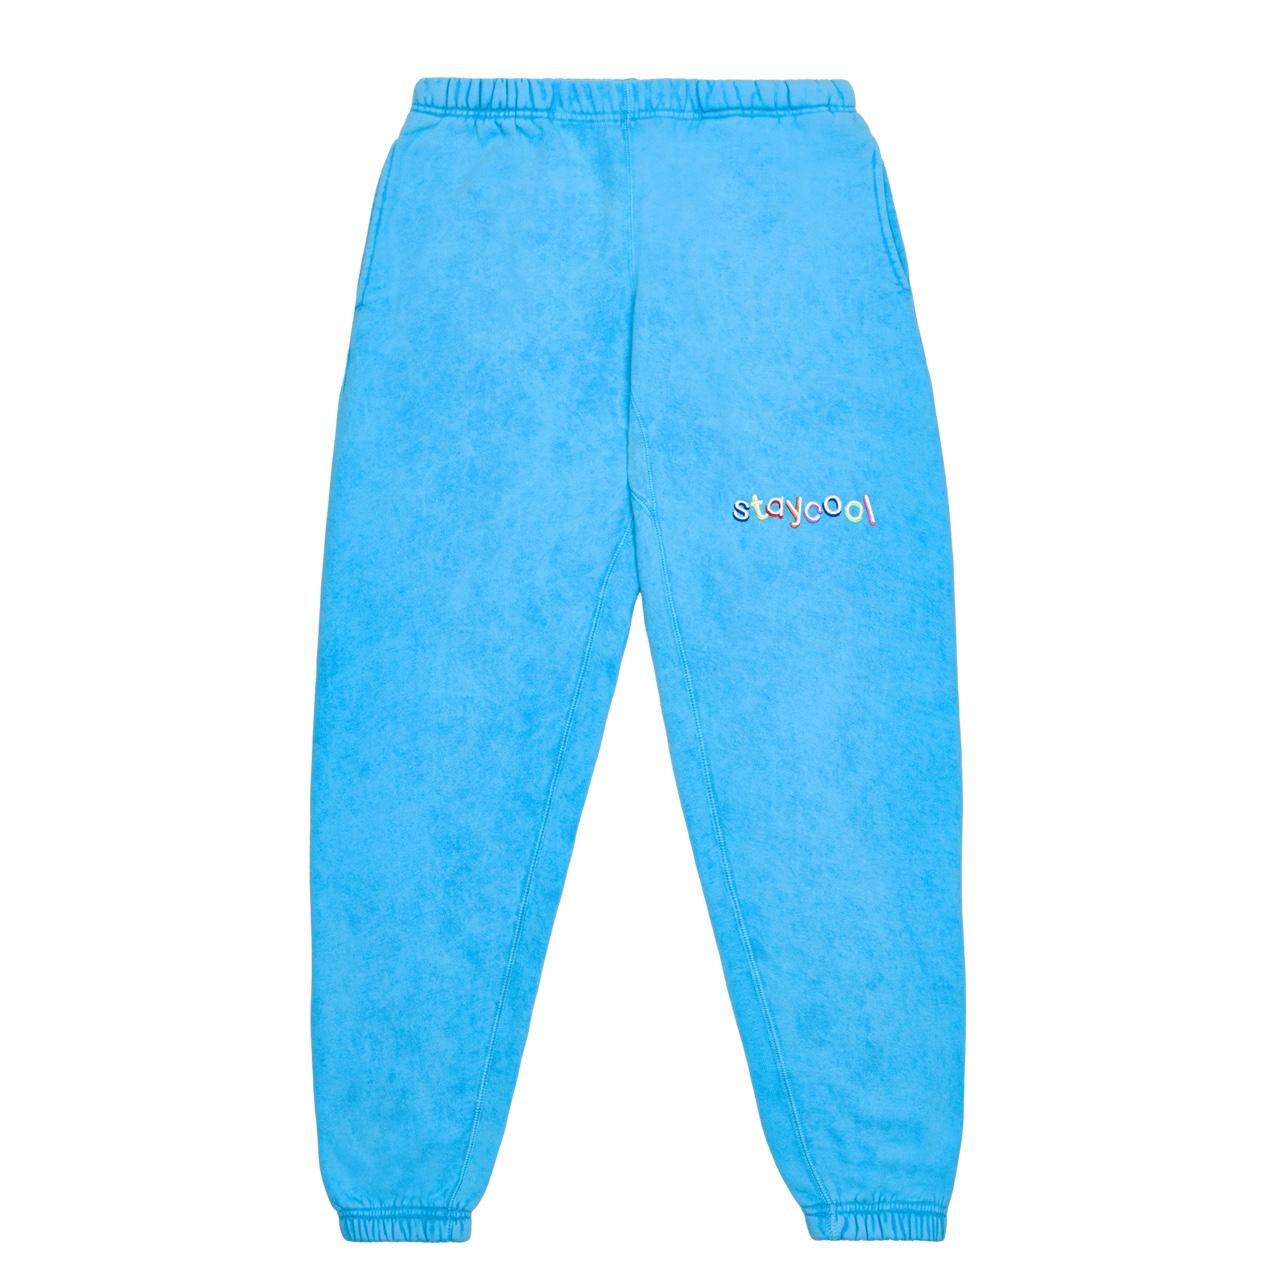 STAY COOL NYC Men's Joggers-tracksuits (3)